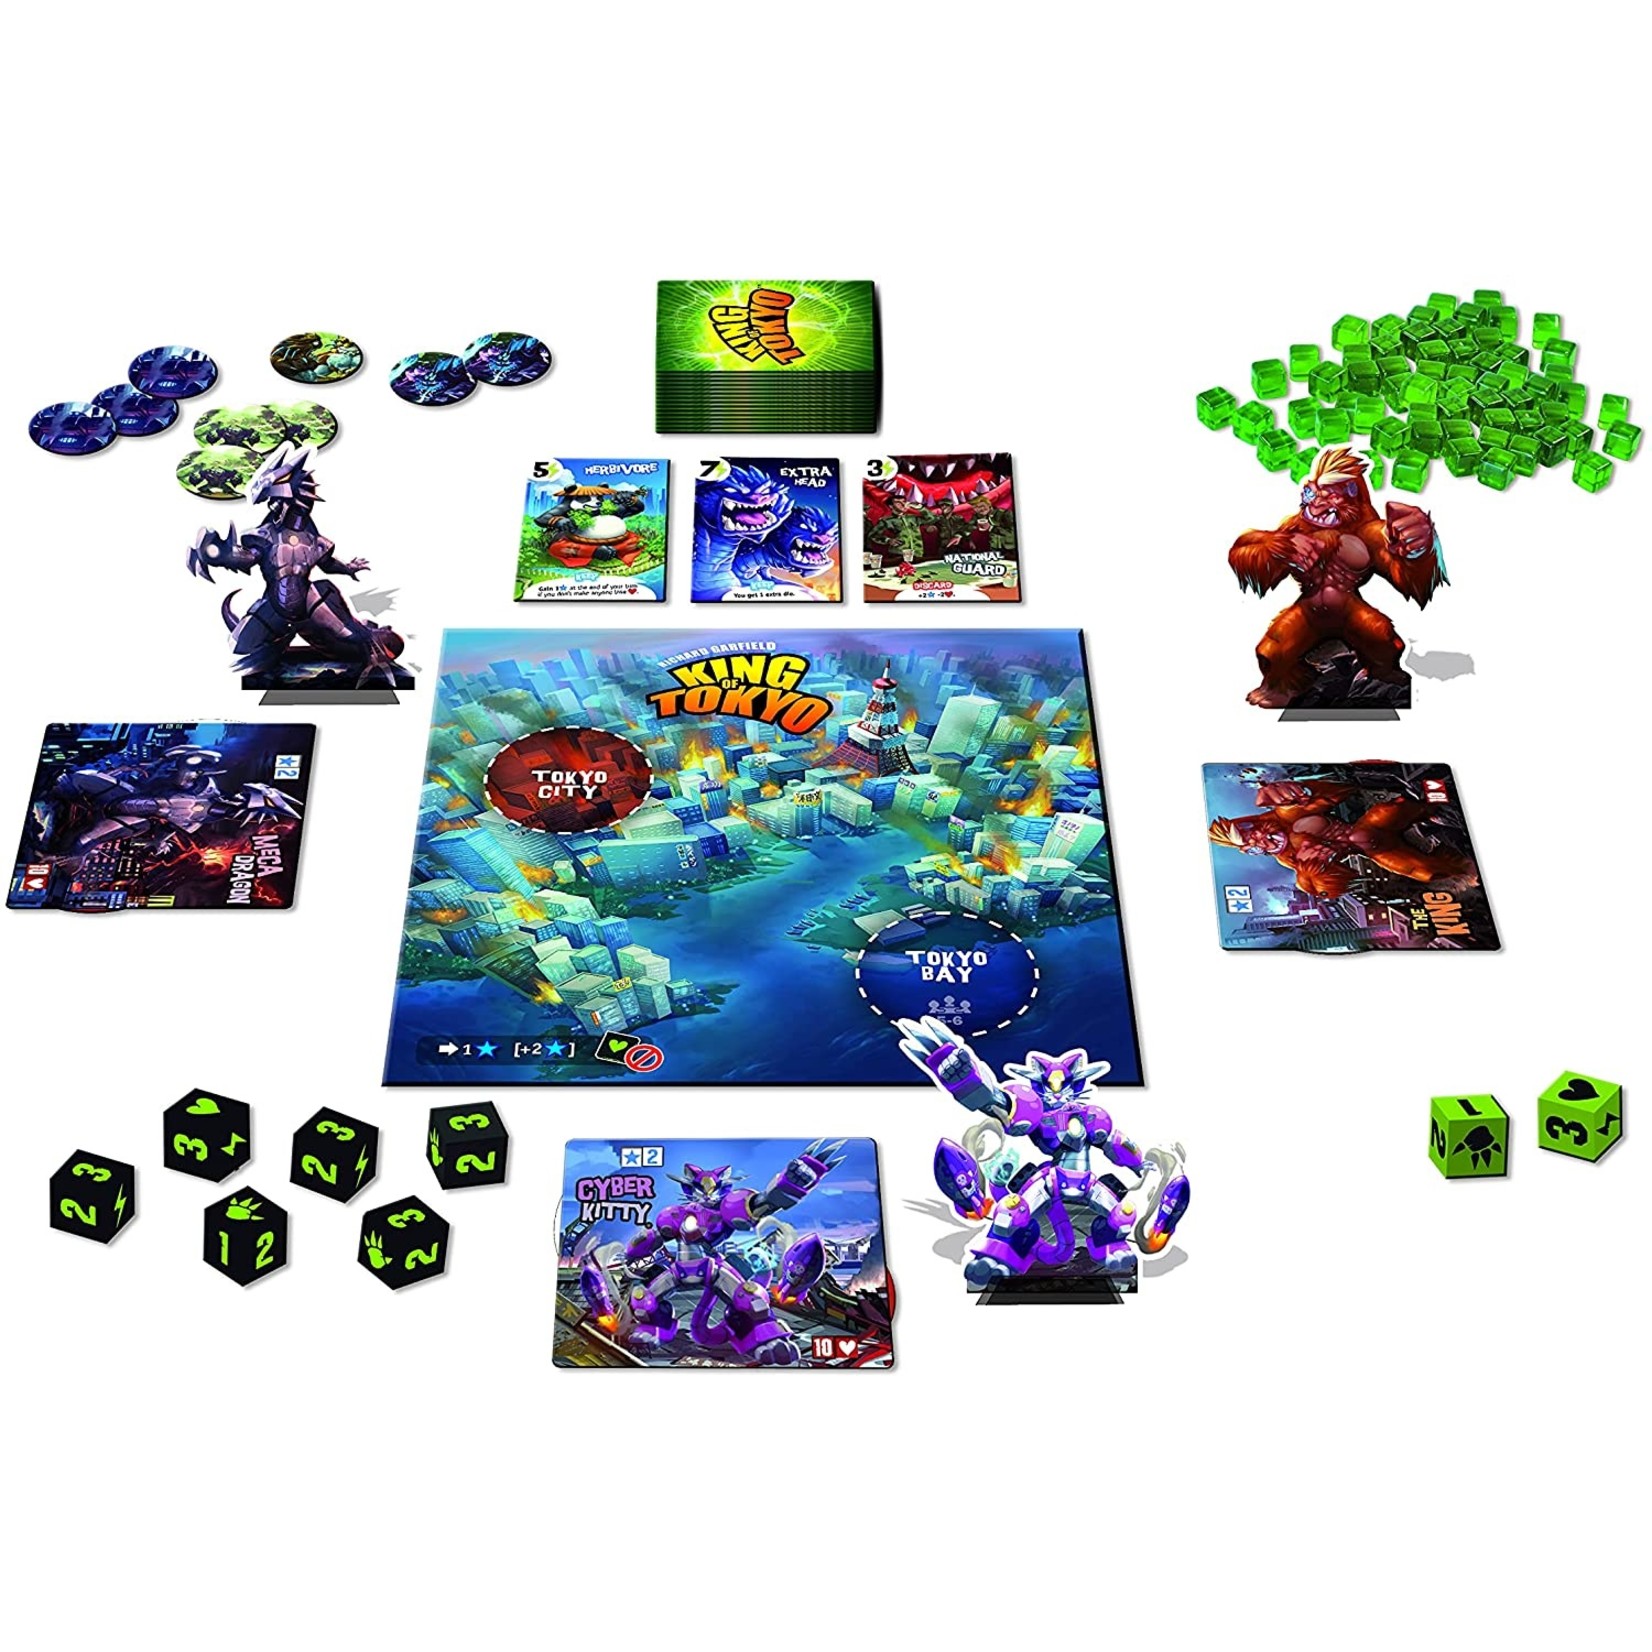 Iello King of Tokyo (Second Edition)